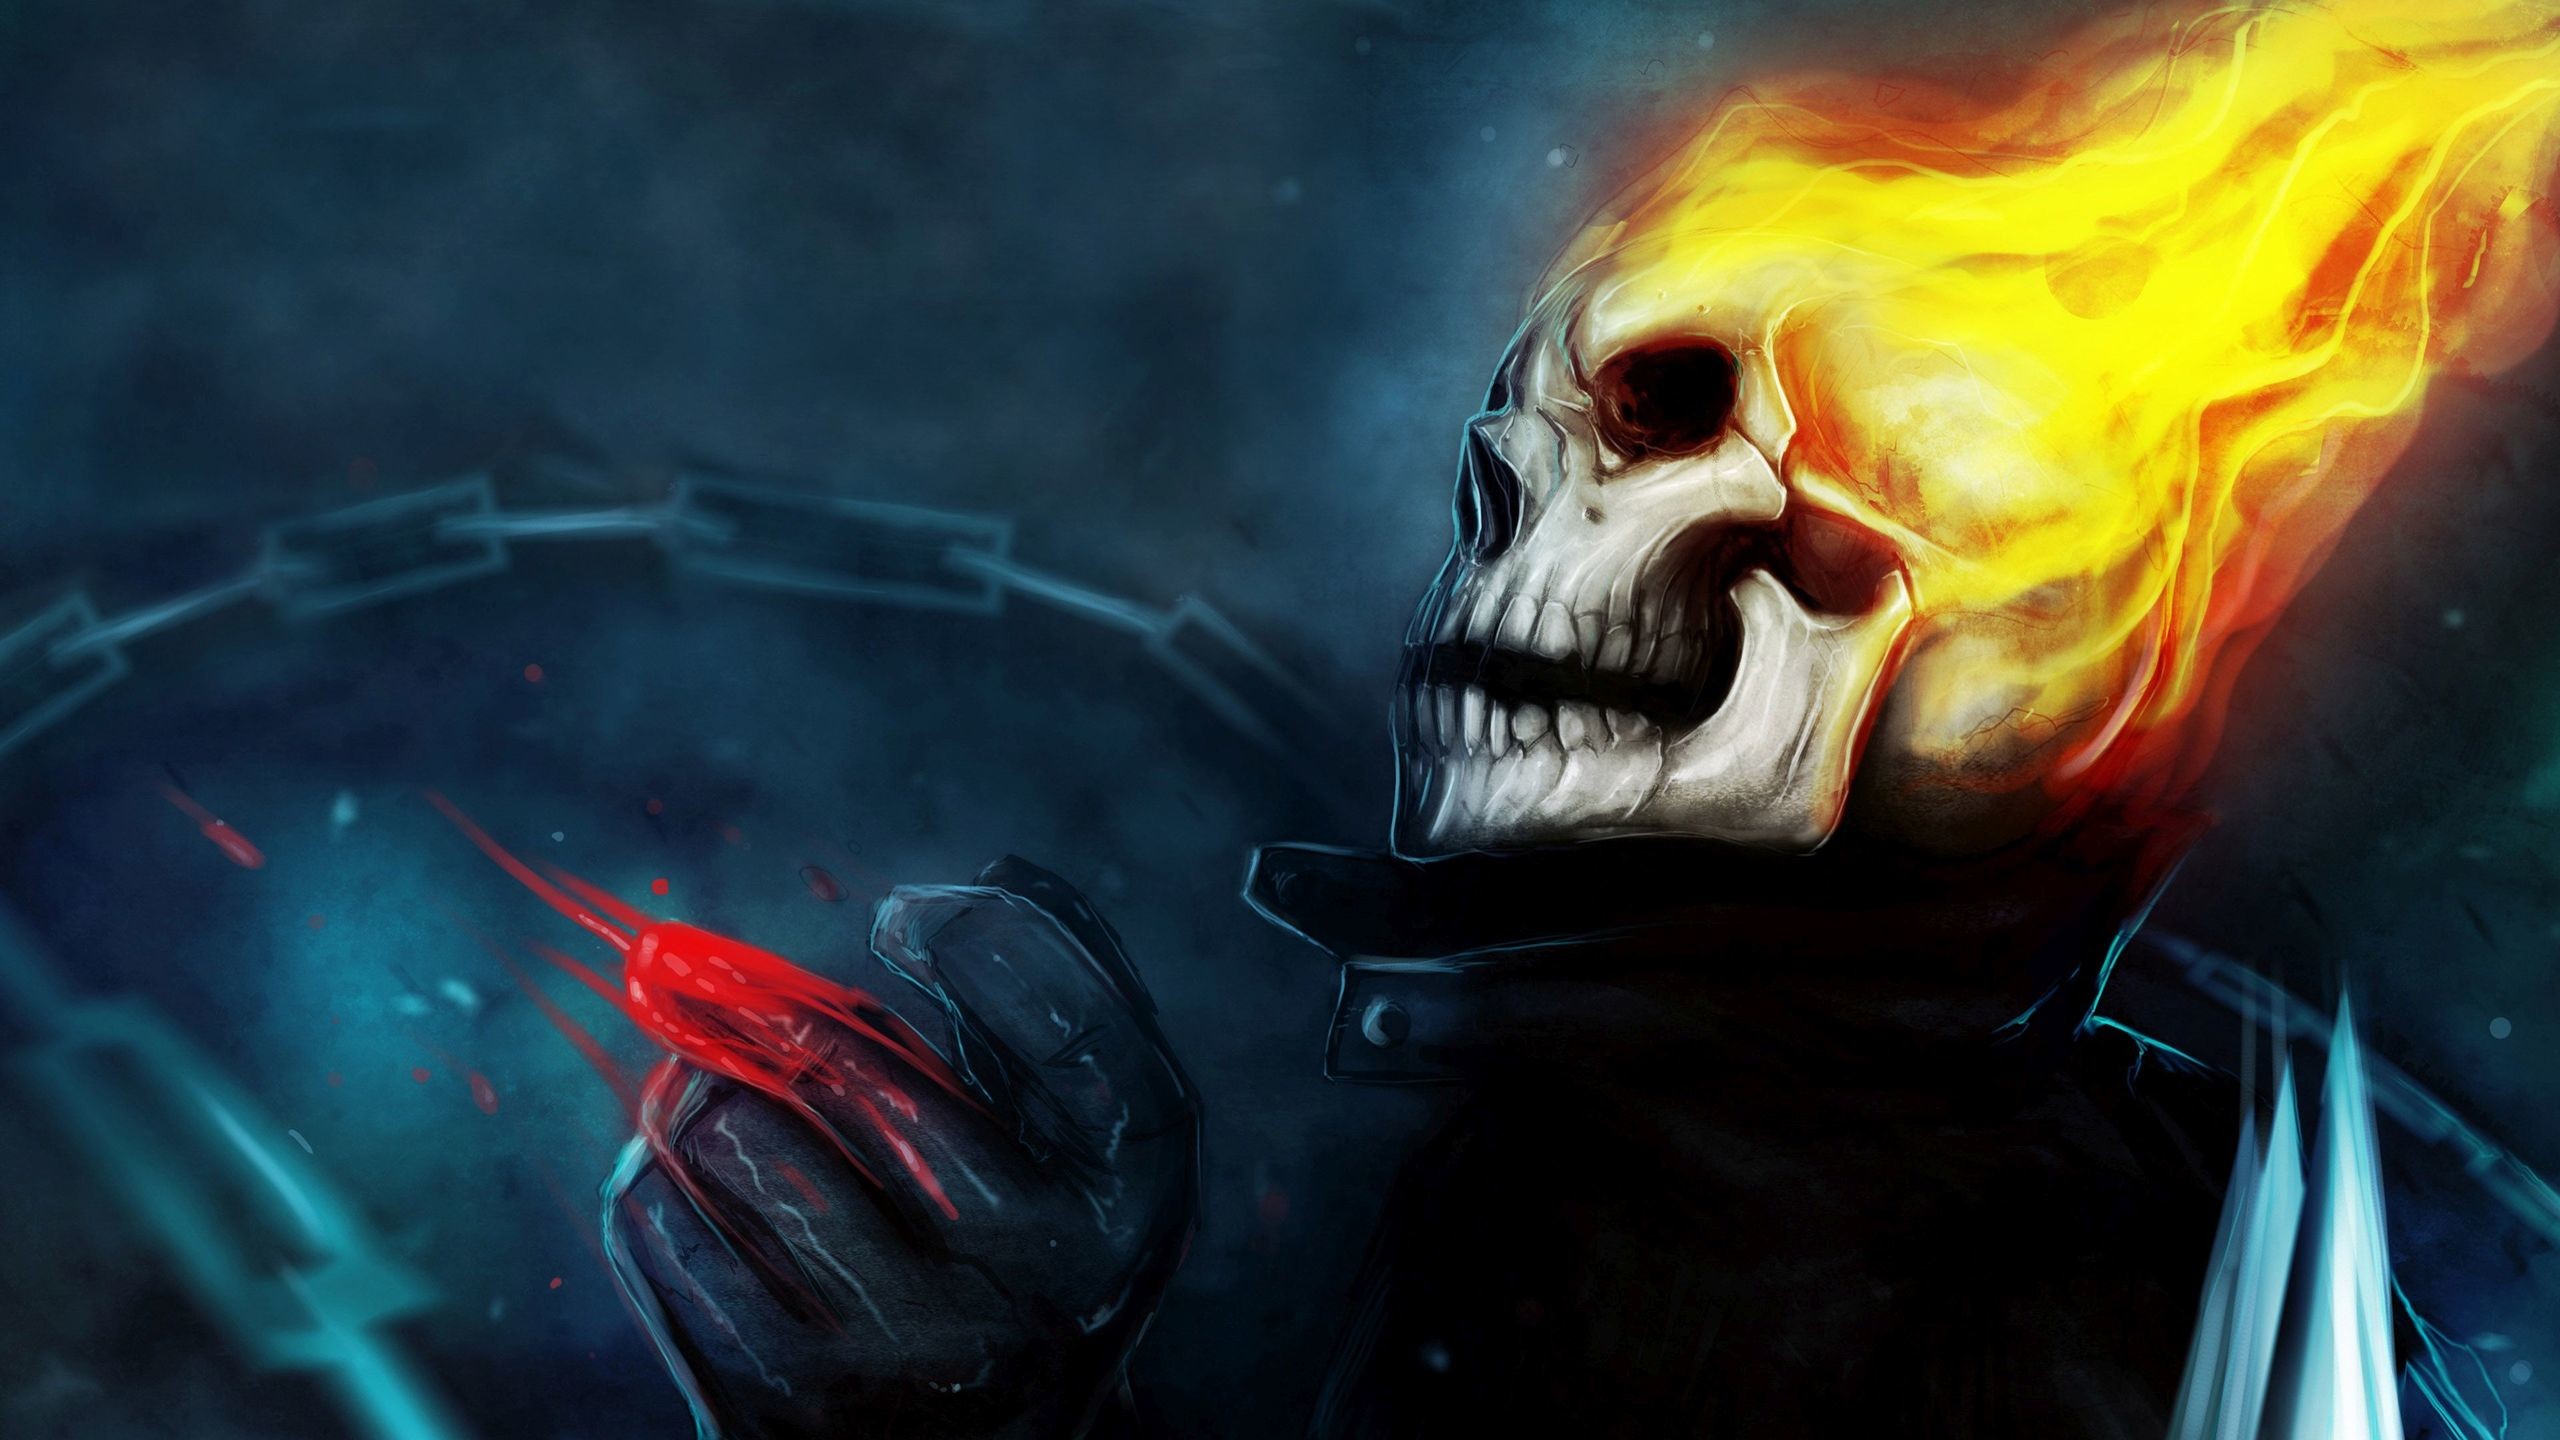 Ghost Rider full movie HD 720 download